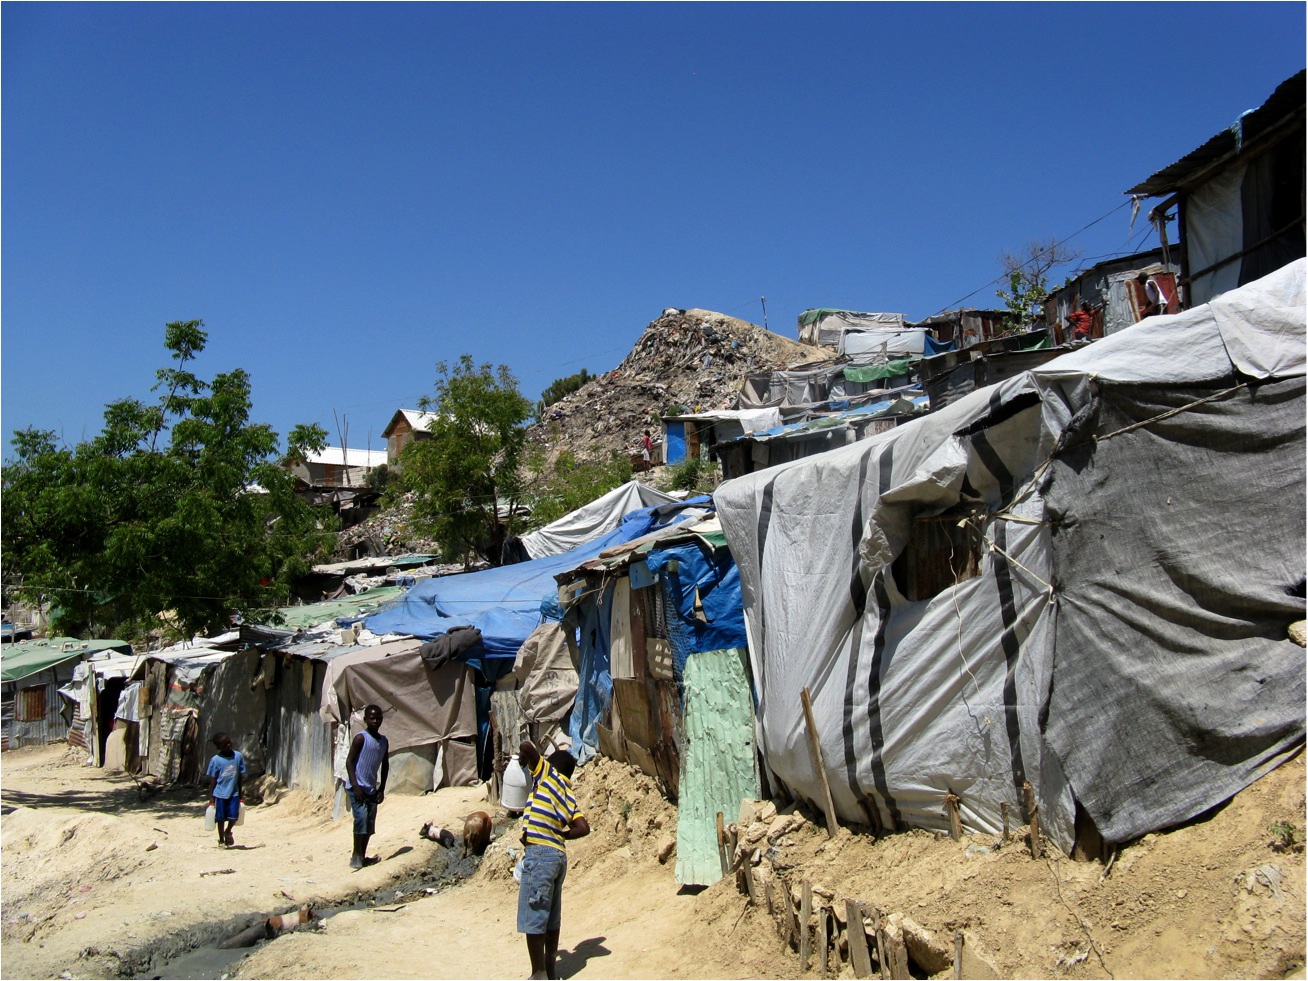 The two islands of ever-struggling Haiti